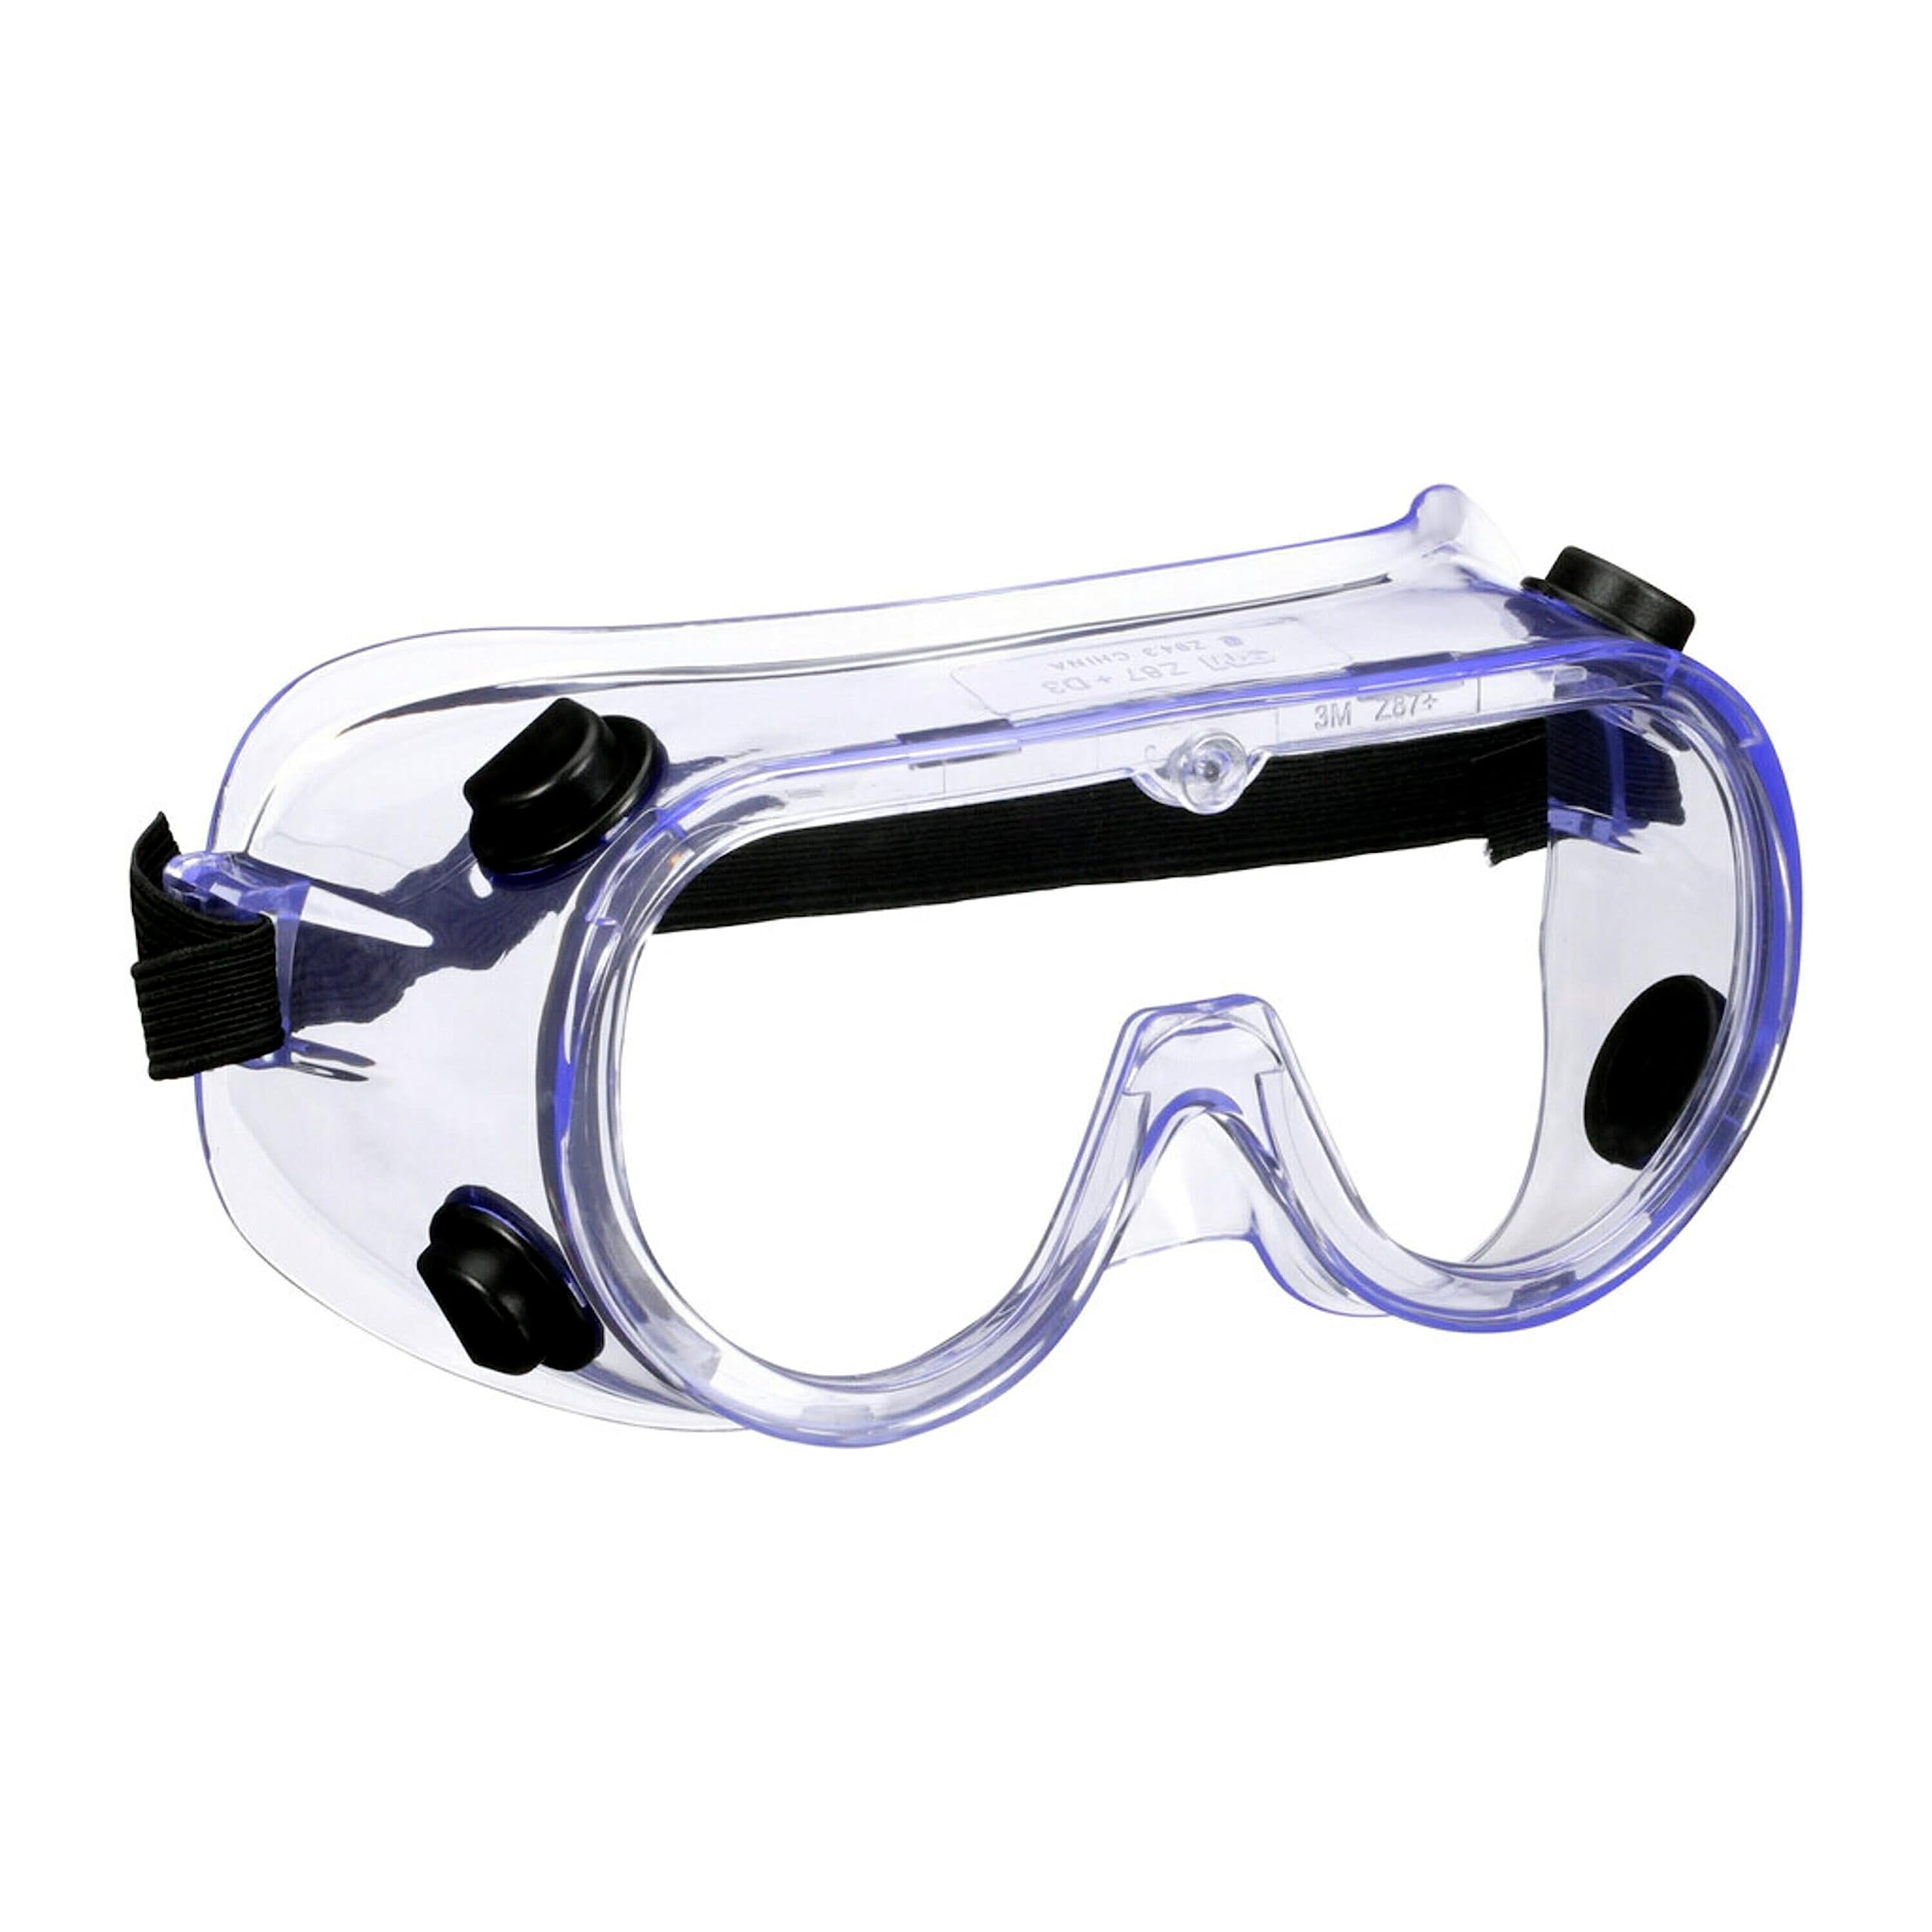 3M Chemical Splash/Impact Goggle (Clear) $1.81 + Free Shipping w/ Prime or on $35+